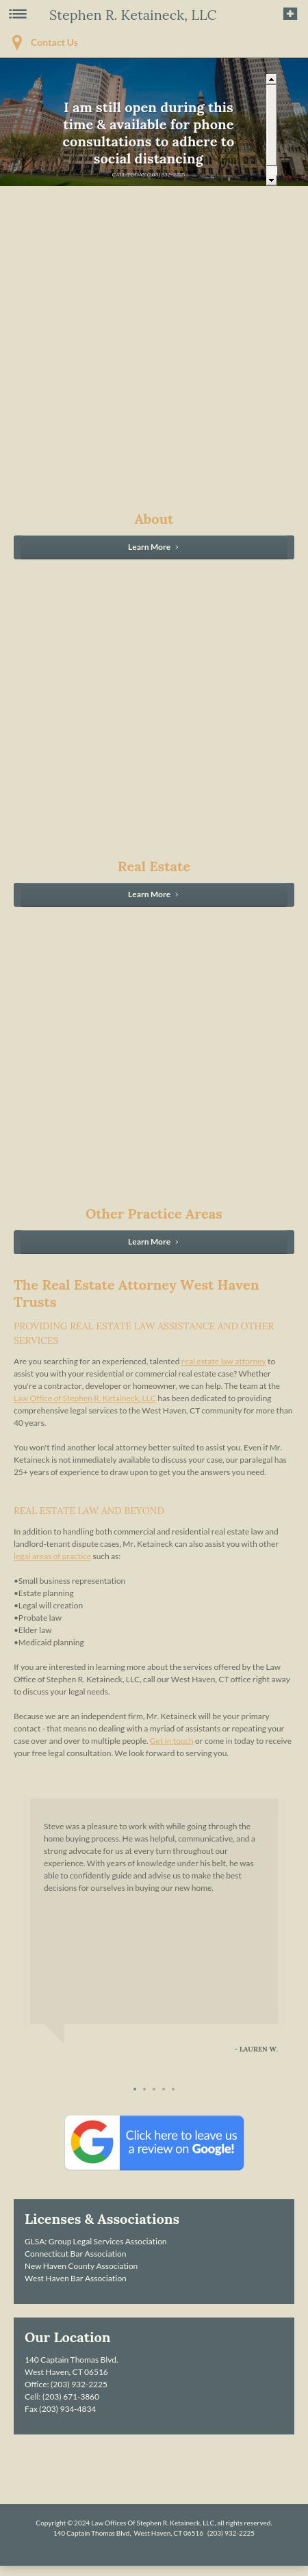 Ketaineck, Stephen R. Law Offices of - West Haven CT Lawyers